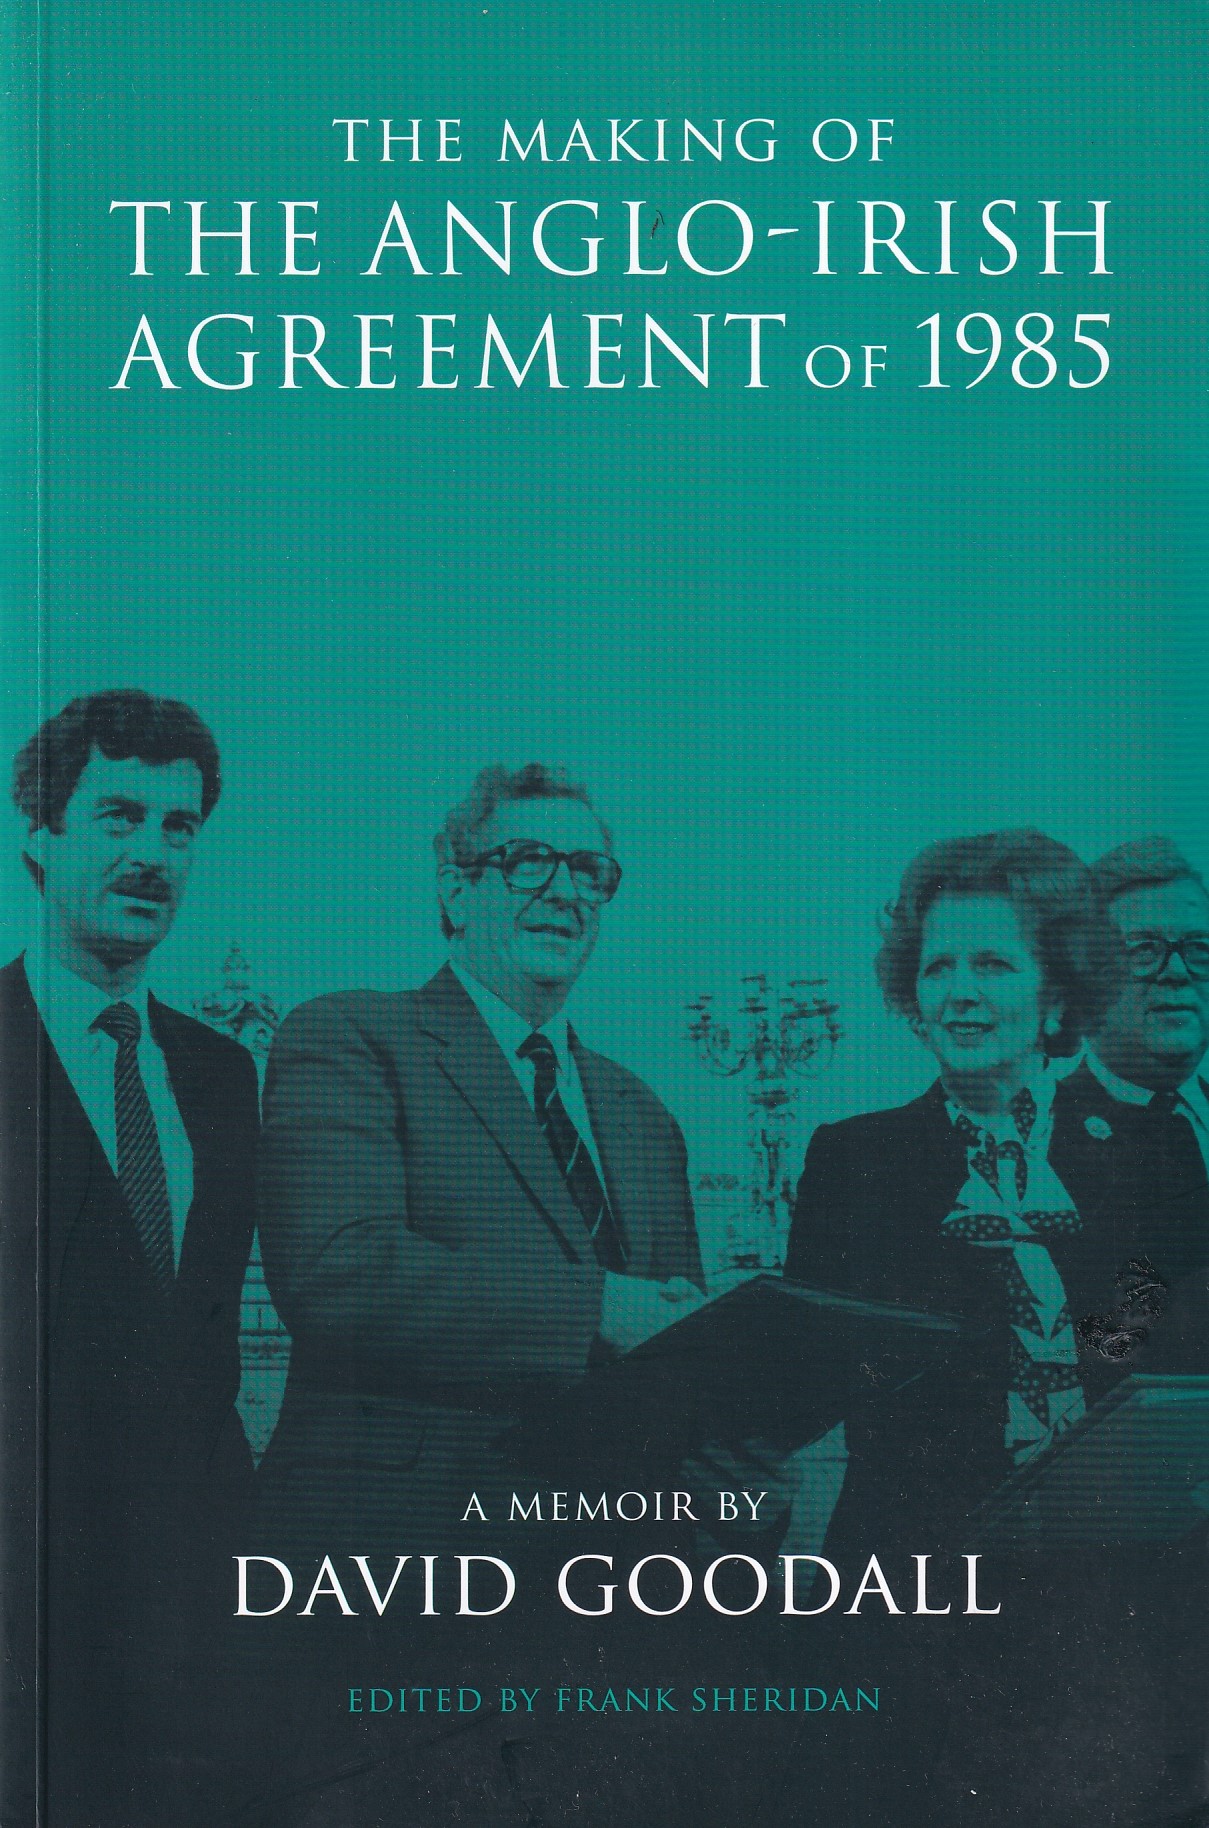 The Making of the Anglo-Irish Agreement of 1985 | David Goodall | Charlie Byrne's